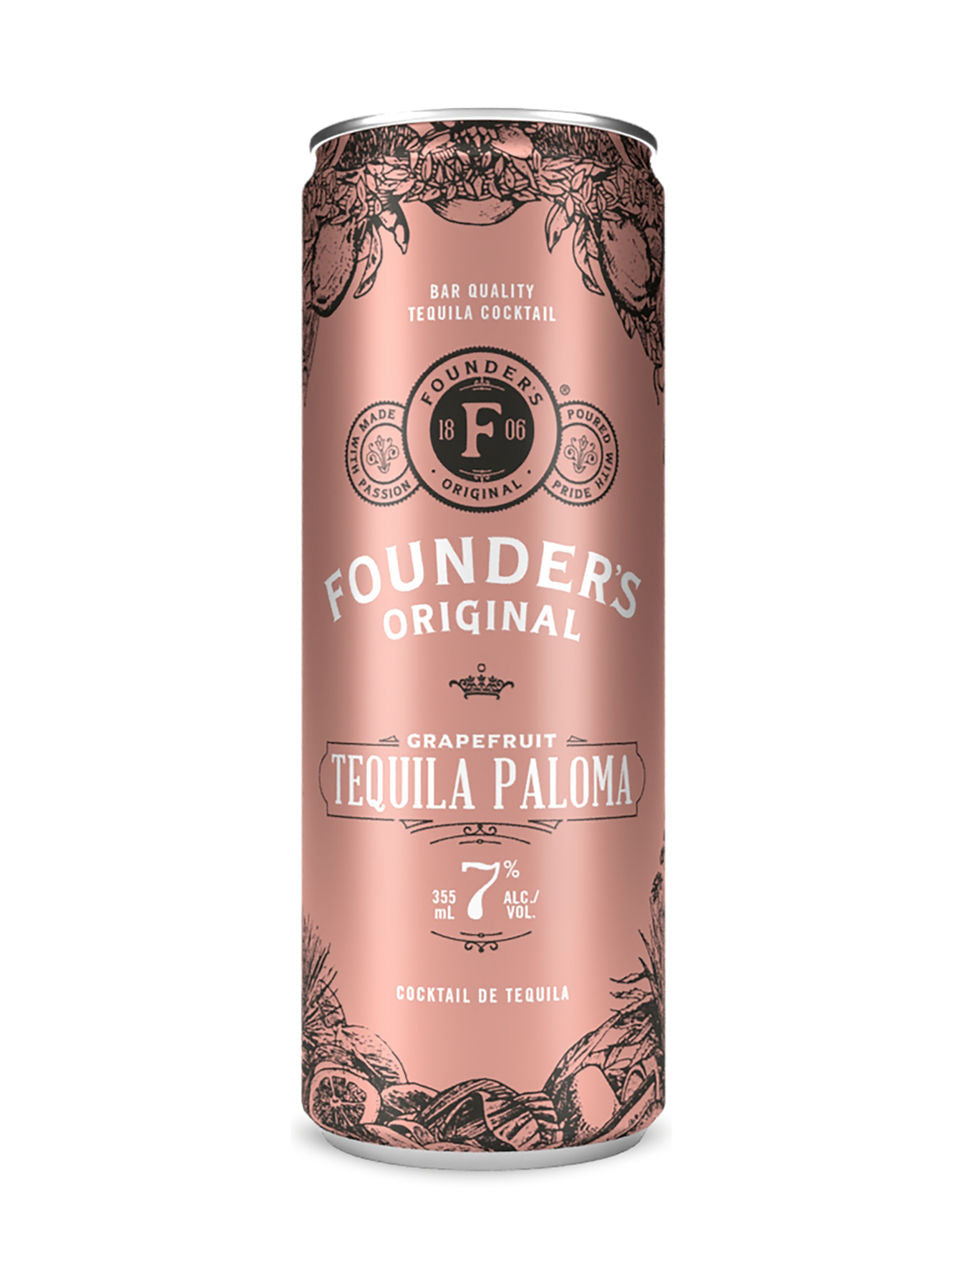 Founder's Original Tequila Paloma 355 mL can